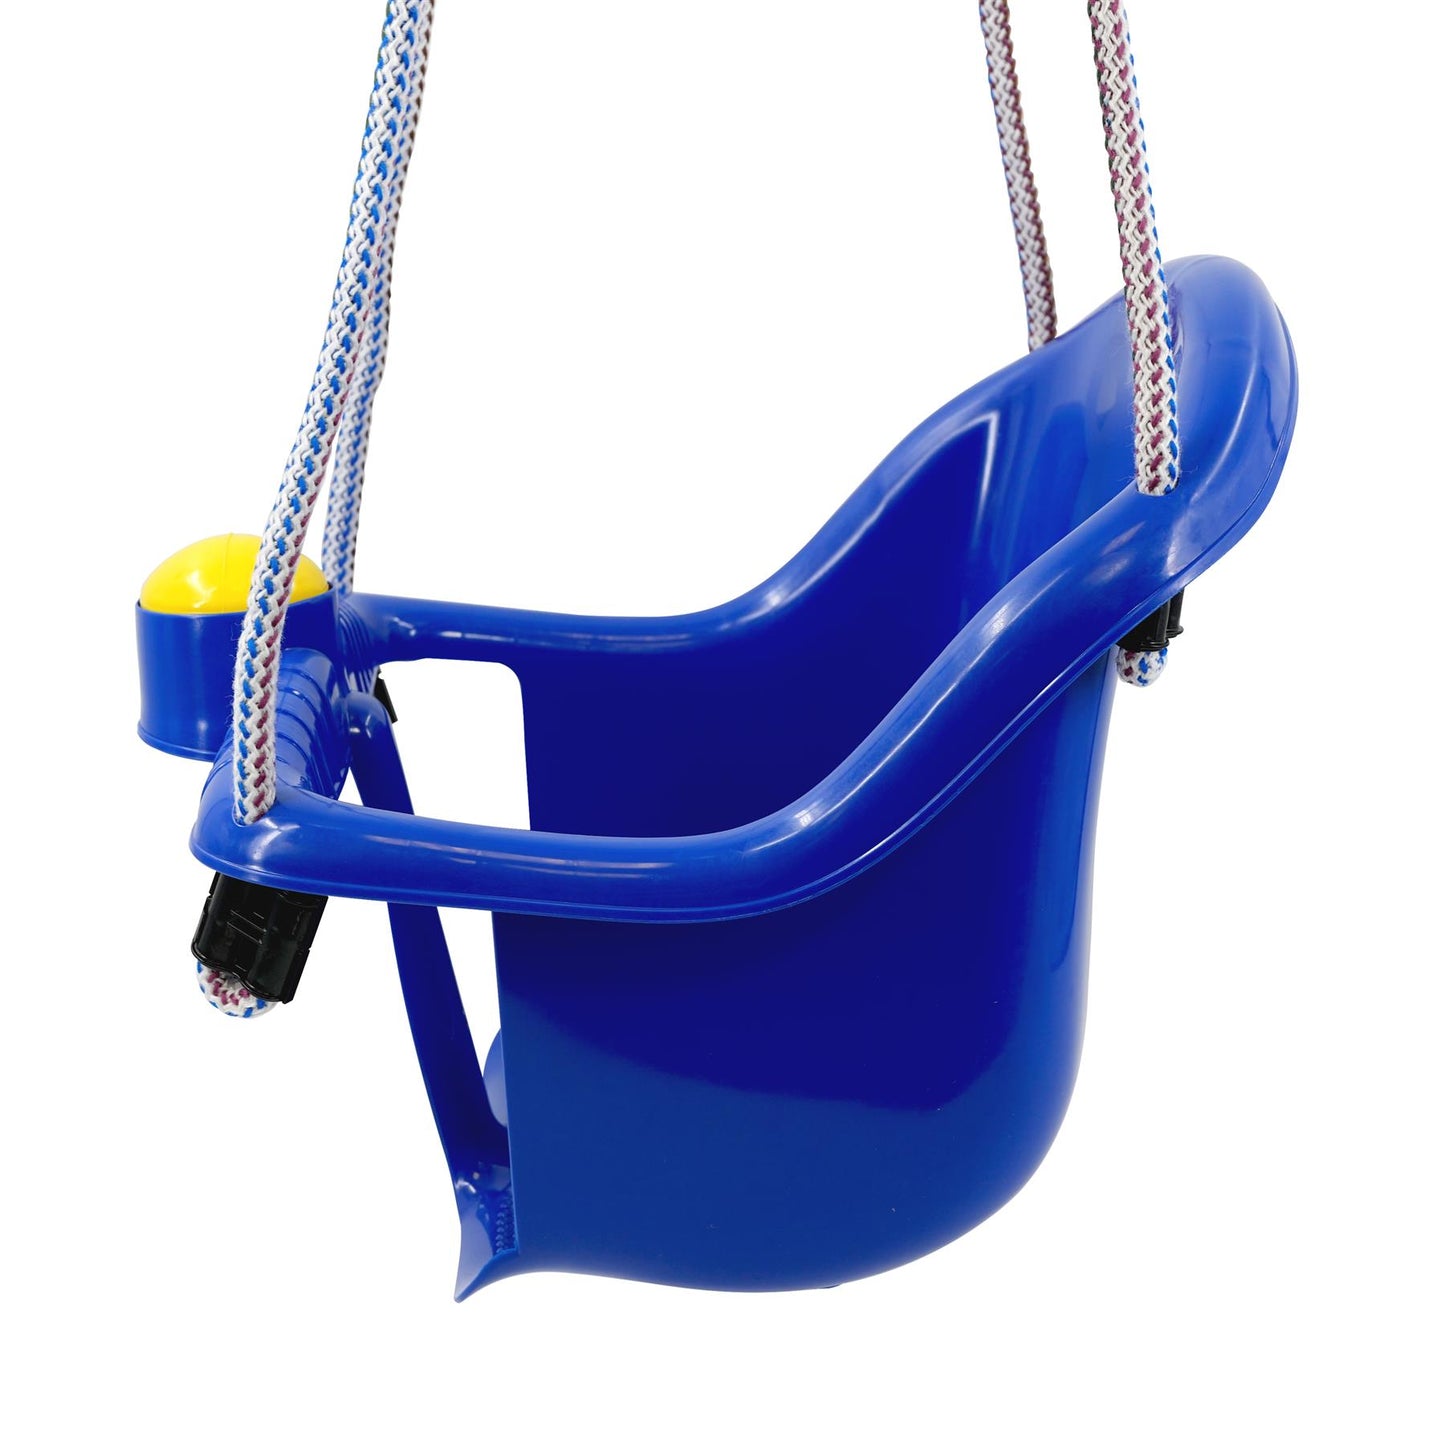 Blue Children's Safety Swing Seat by MTS - UKBuyZone